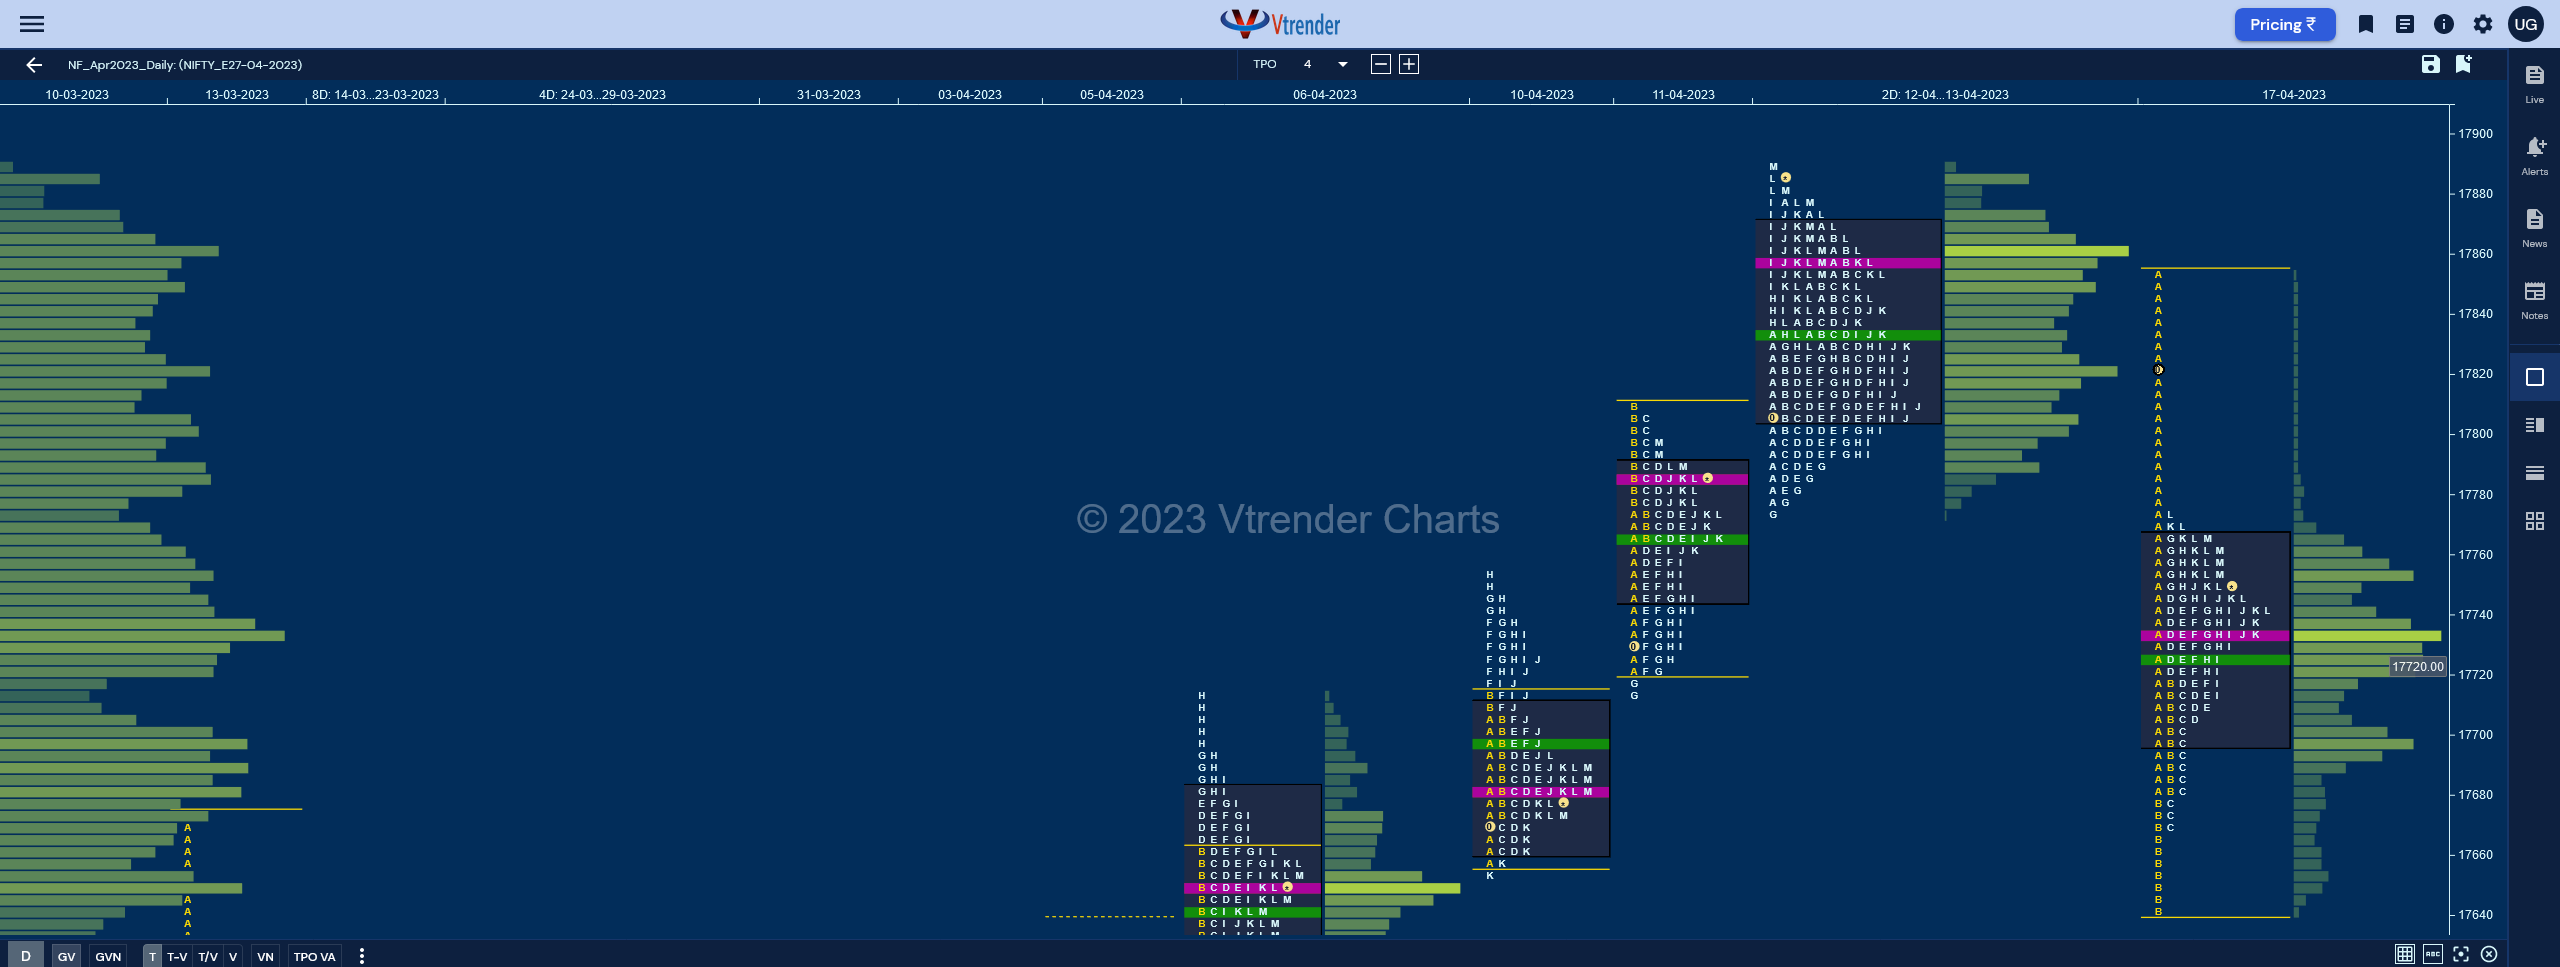 Nf 8 Market Profile Analysis Dated 17Th Apr 2023 Banknifty Futures, Charts, Day Trading, Intraday Trading, Intraday Trading Strategies, Market Profile, Market Profile Trading Strategies, Nifty Futures, Order Flow Analysis, Support And Resistance, Technical Analysis, Trading Strategies, Volume Profile Trading